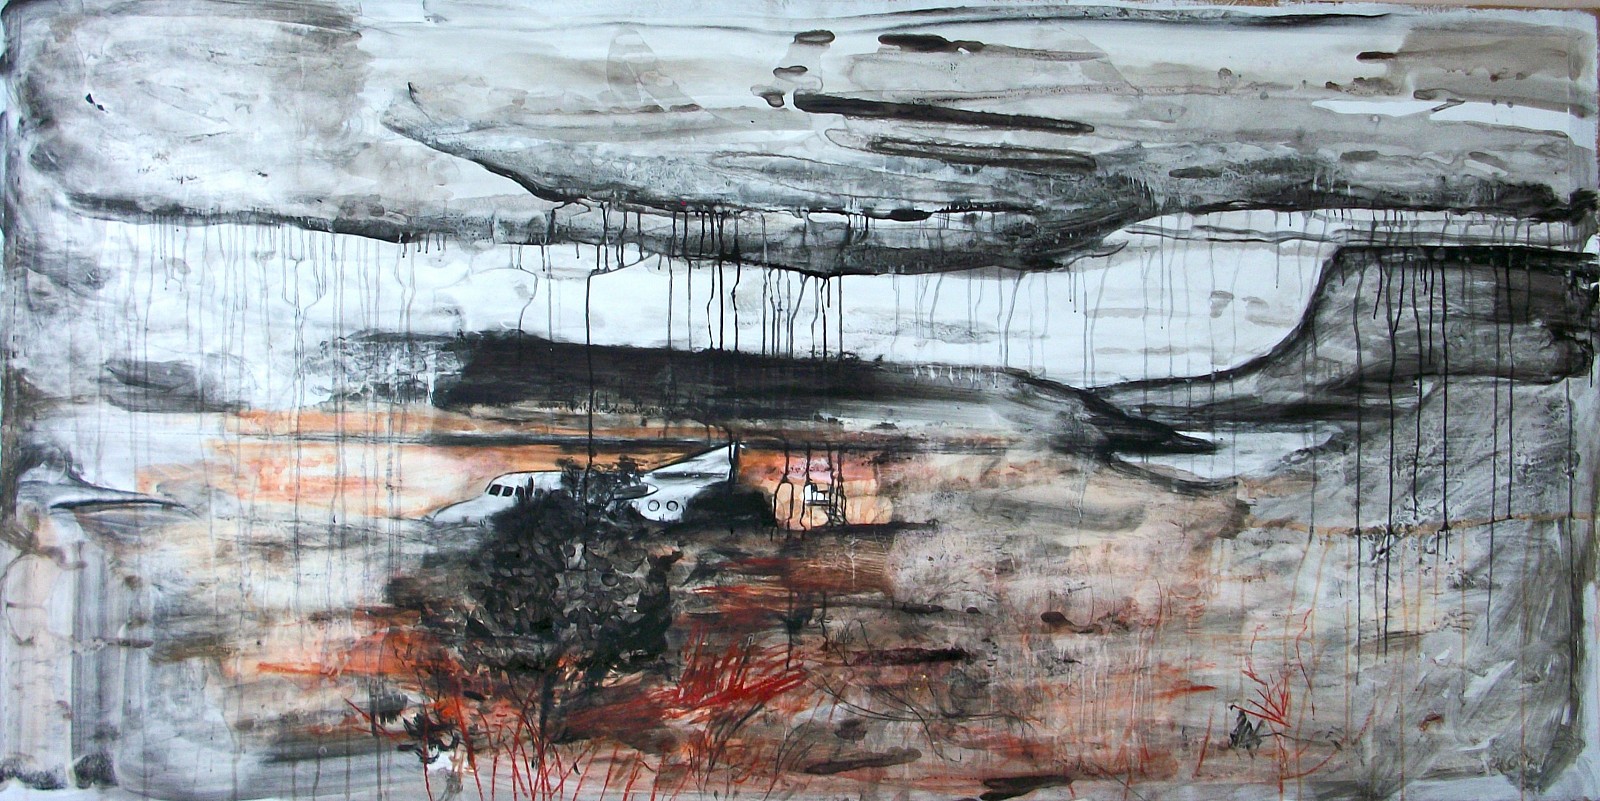 Andy Parsons
Landscape With Downed Plane, 2011-12
charcoal, chalk, ink, conte crayon on gessoed paper, 48 x 106 in.